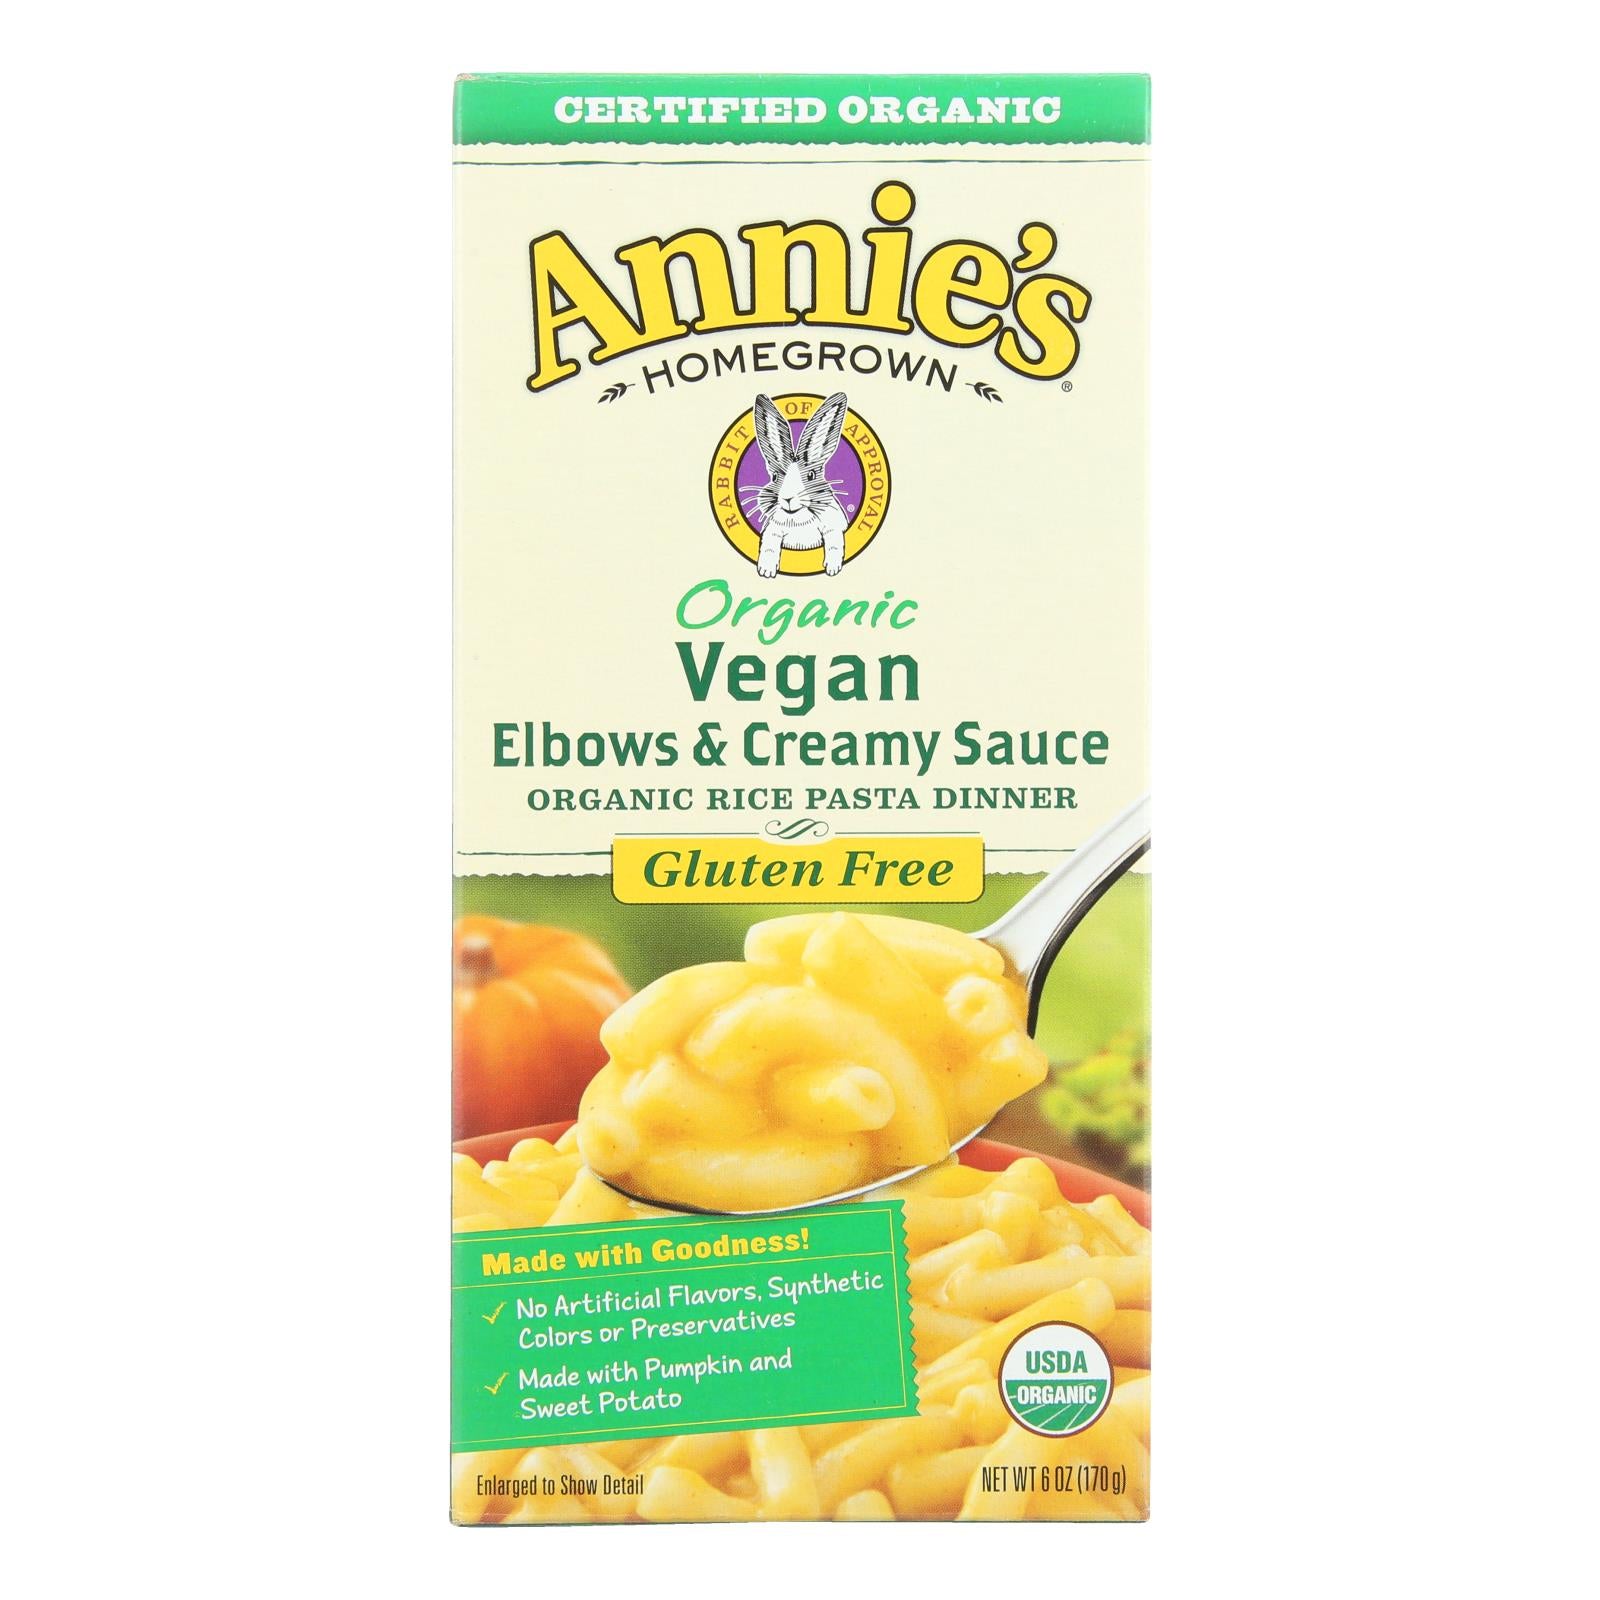 Annie'S Homegrown, Annie's Homegrown Organic Gluten Free Vegan Elbows and Creamy Sauce Rice Pasta Dinner - Case of 12 - 6 oz. (Pack of 12)